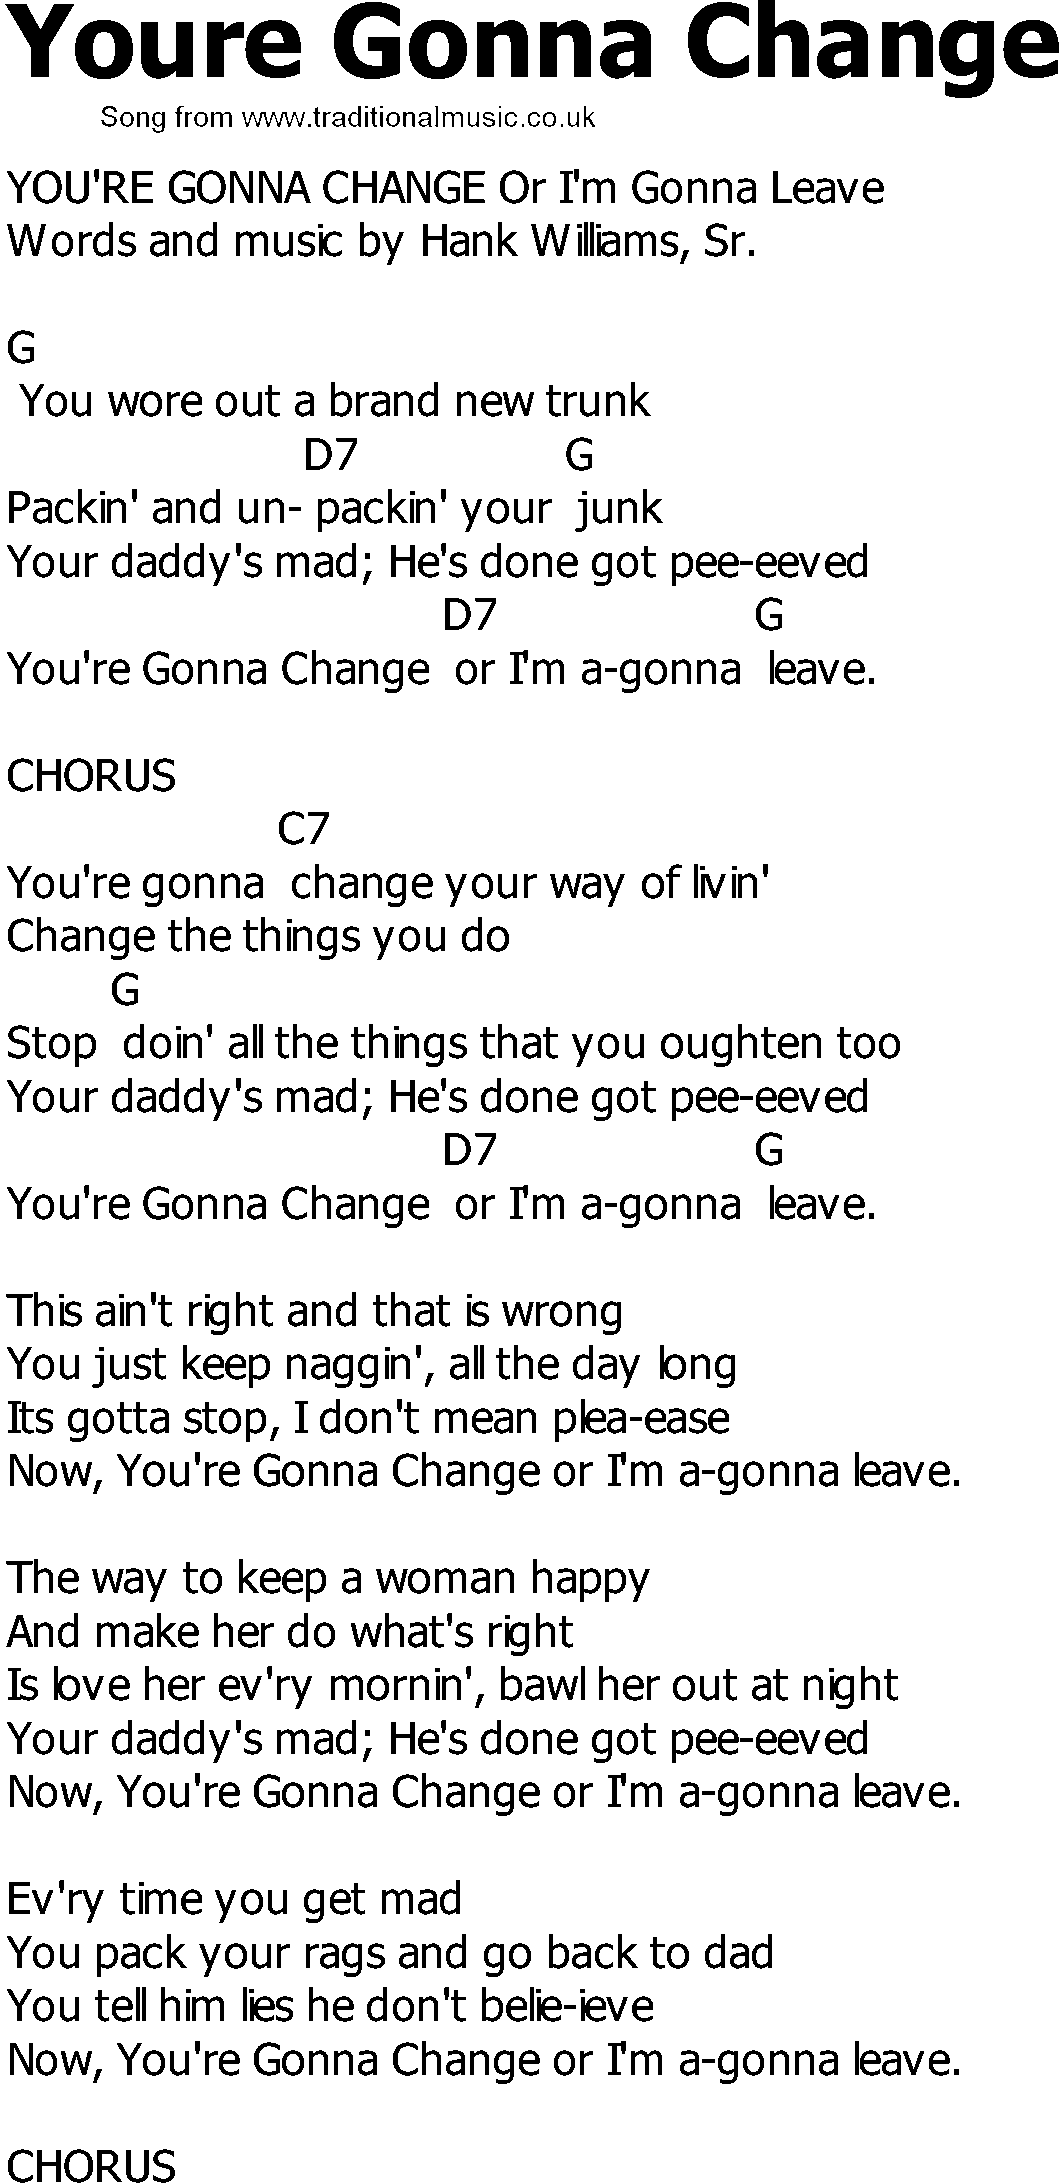 Old Country song lyrics with chords - Youre Gonna Change